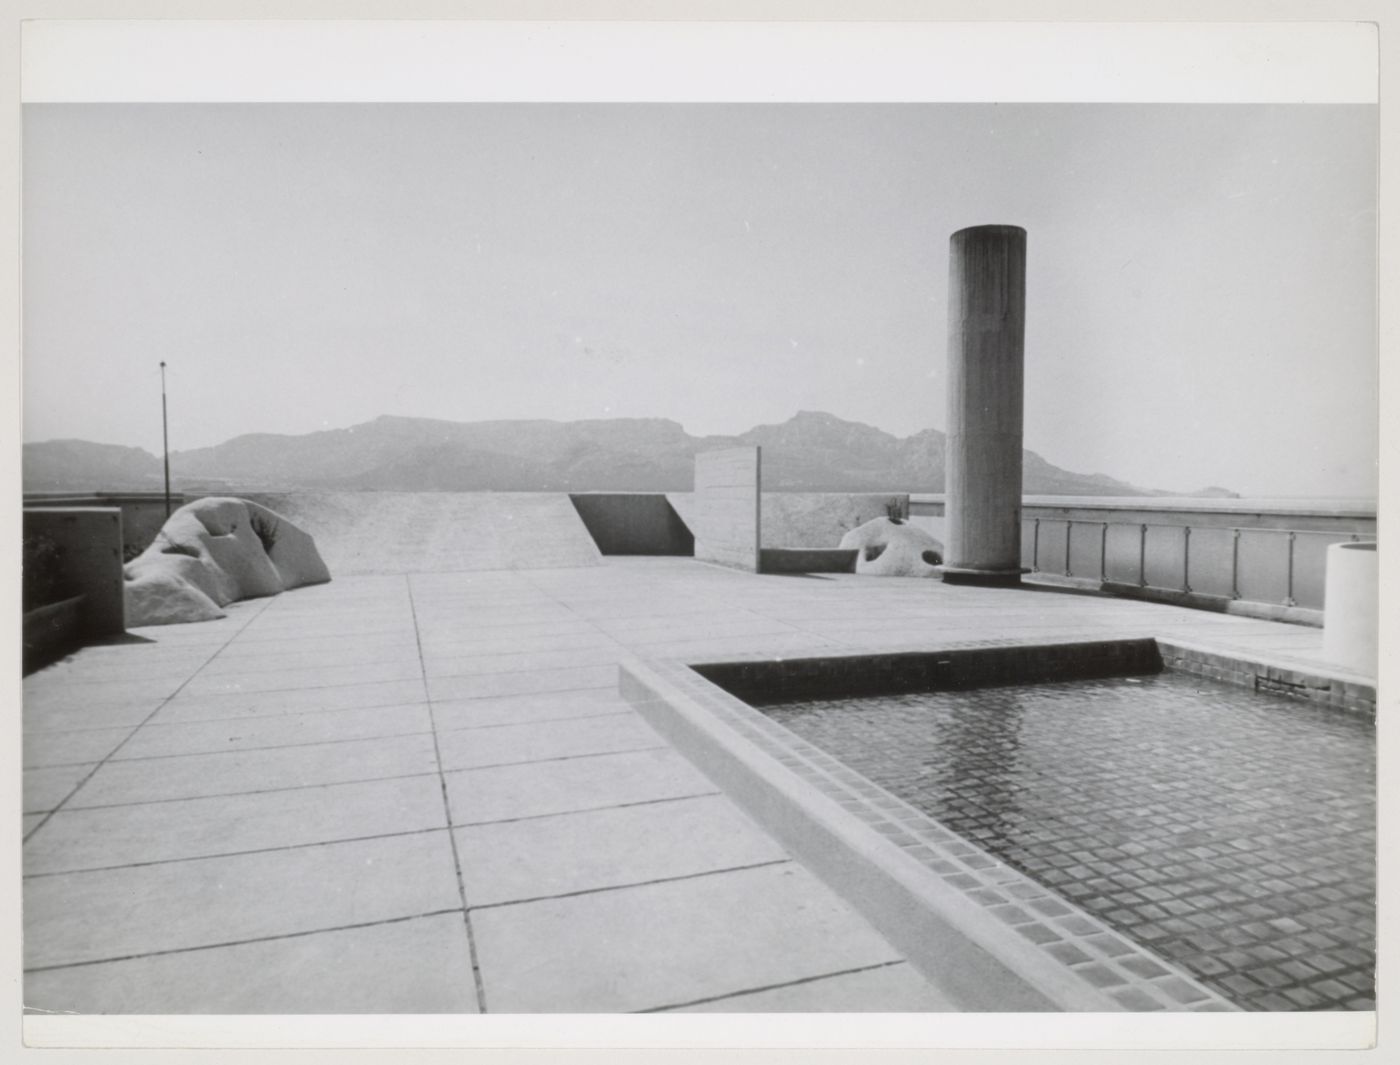 View of the roof of Unité d'habitation showing the pool, playground, freestanding column and sculpted planters, Marseille, France